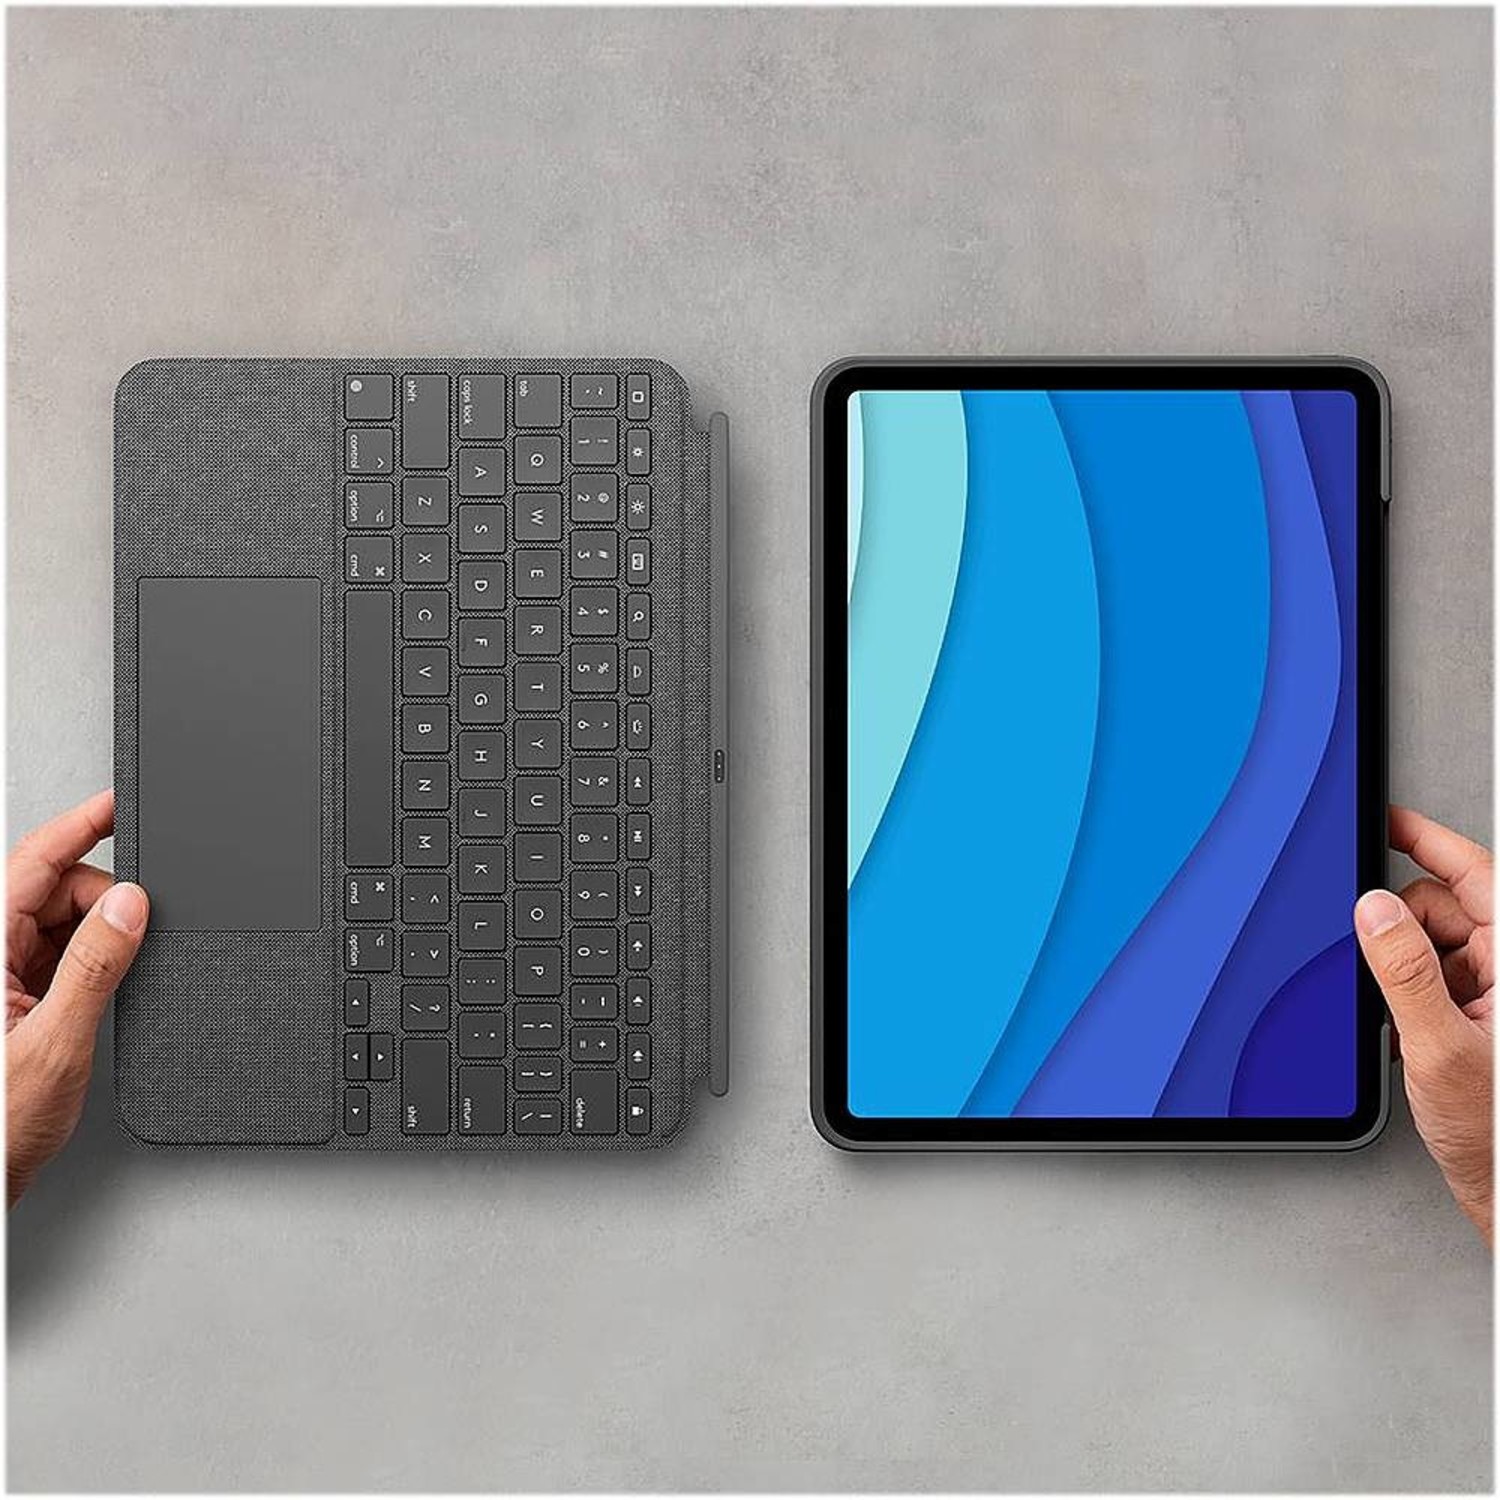 Flyve drage planer Skole lærer Combo Touch Keyboard Case with Trackpad for iPad Pro 11-inch (1st, 2nd, 3rd  gen) - Department Purchasing - Campus Computer Store